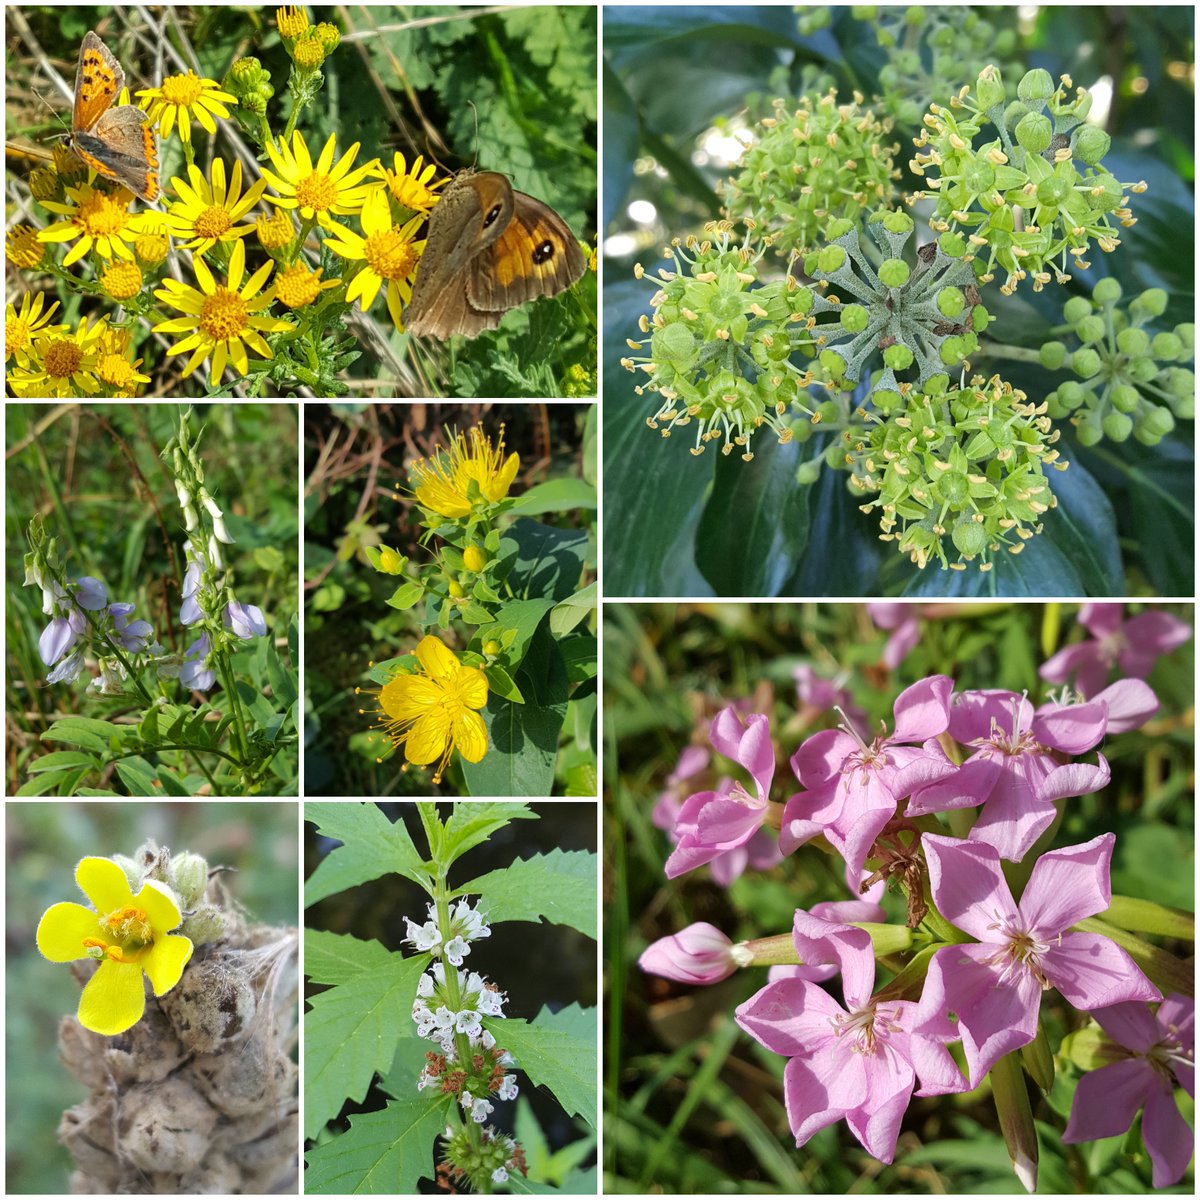 Some of the flowers still doing their thing in Bushy Park this week for #WildFlowerHour
ragwort (feeding small copper and gatekeeper butterflies), ivy, soapwort, gypsywort, great mullein, goat's-rue and stinking tutsan